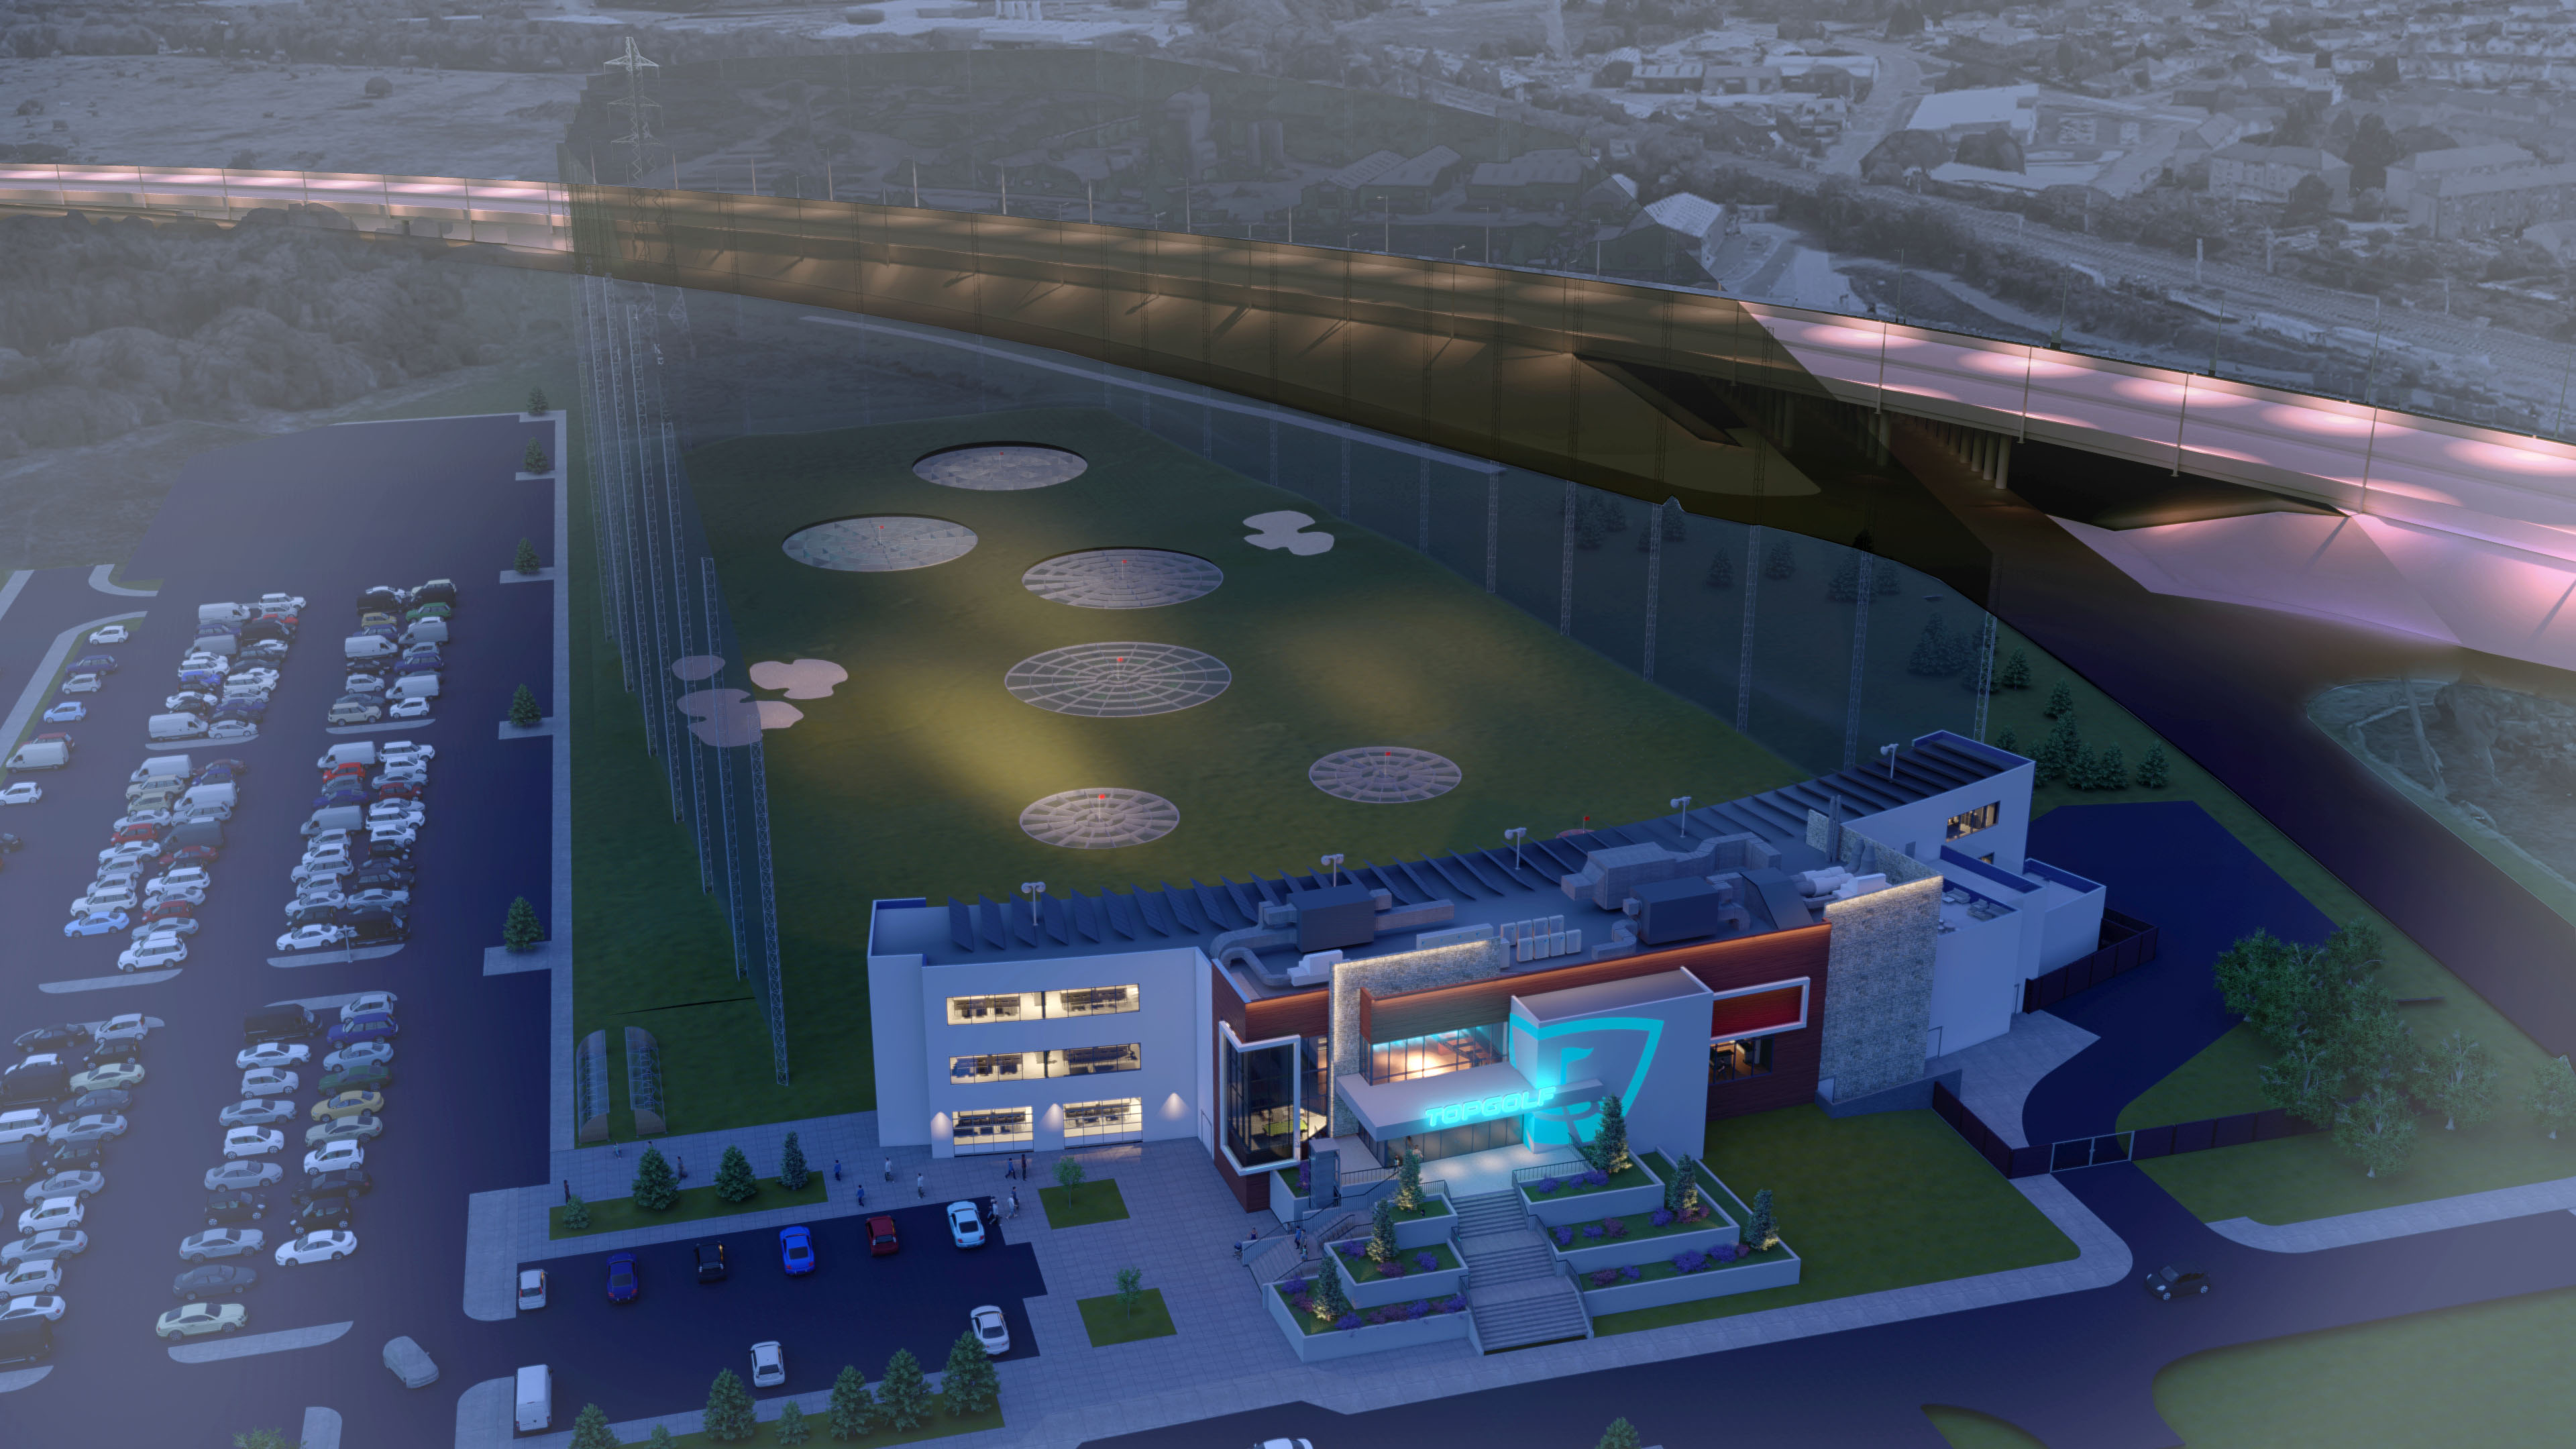 Ashfield Land tees off with Scotland’s first Topgolf attraction